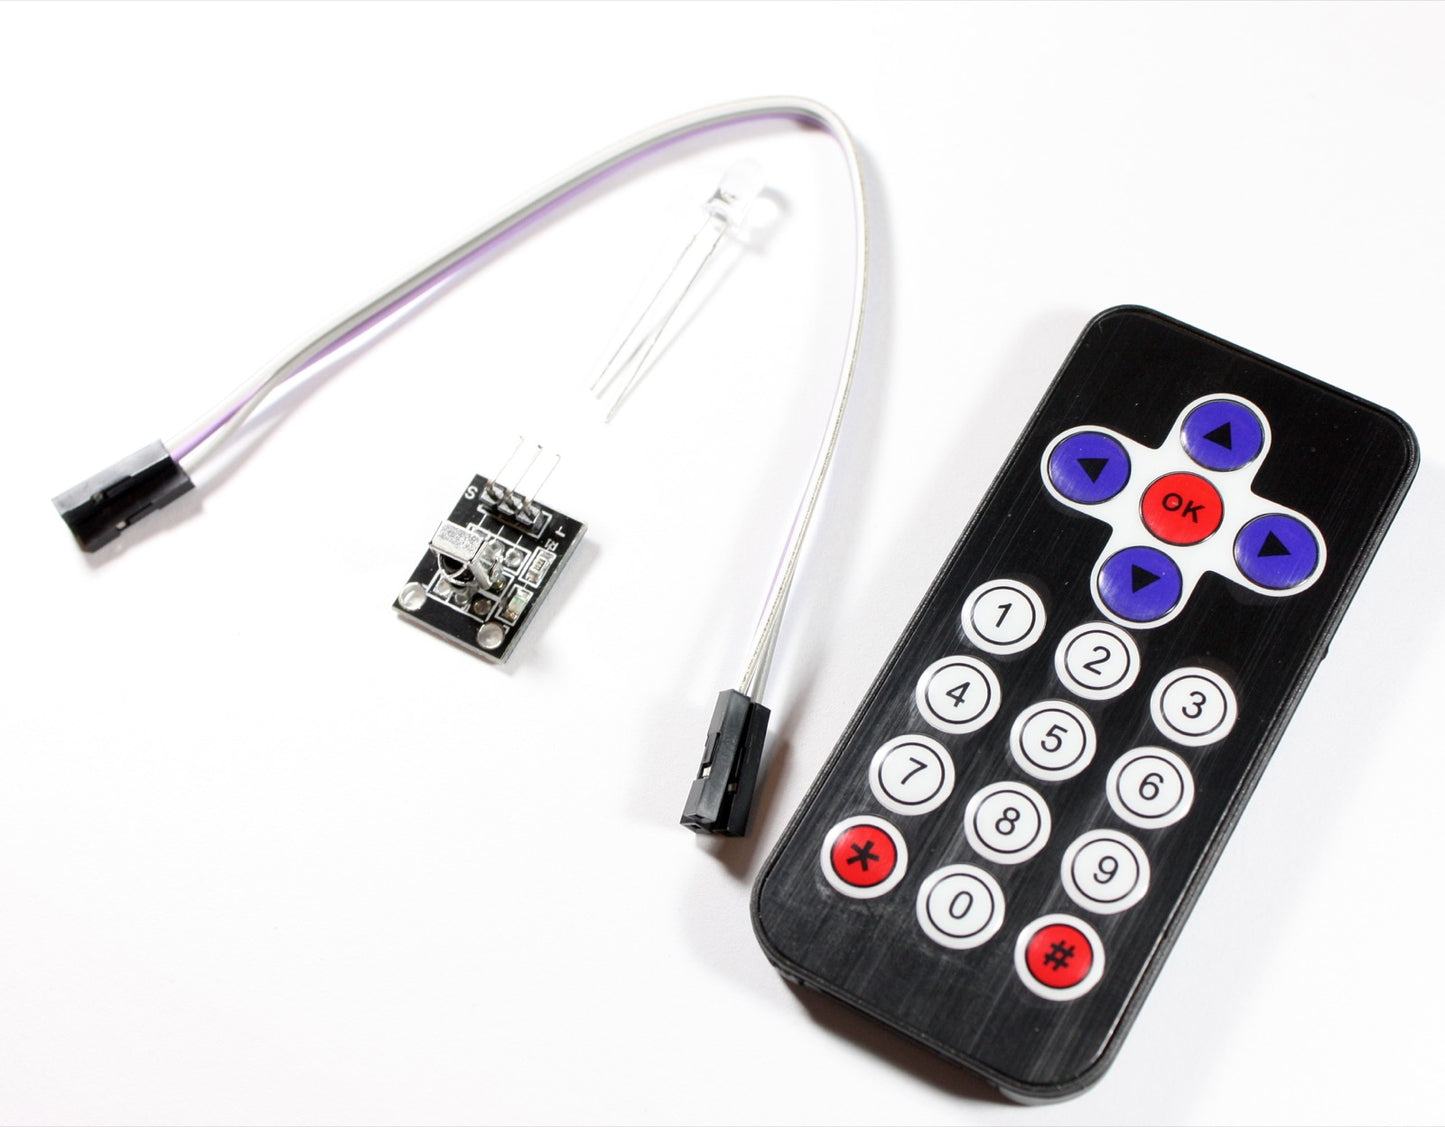 IR Kit with Infrared Diode, Receiver and Remote Control